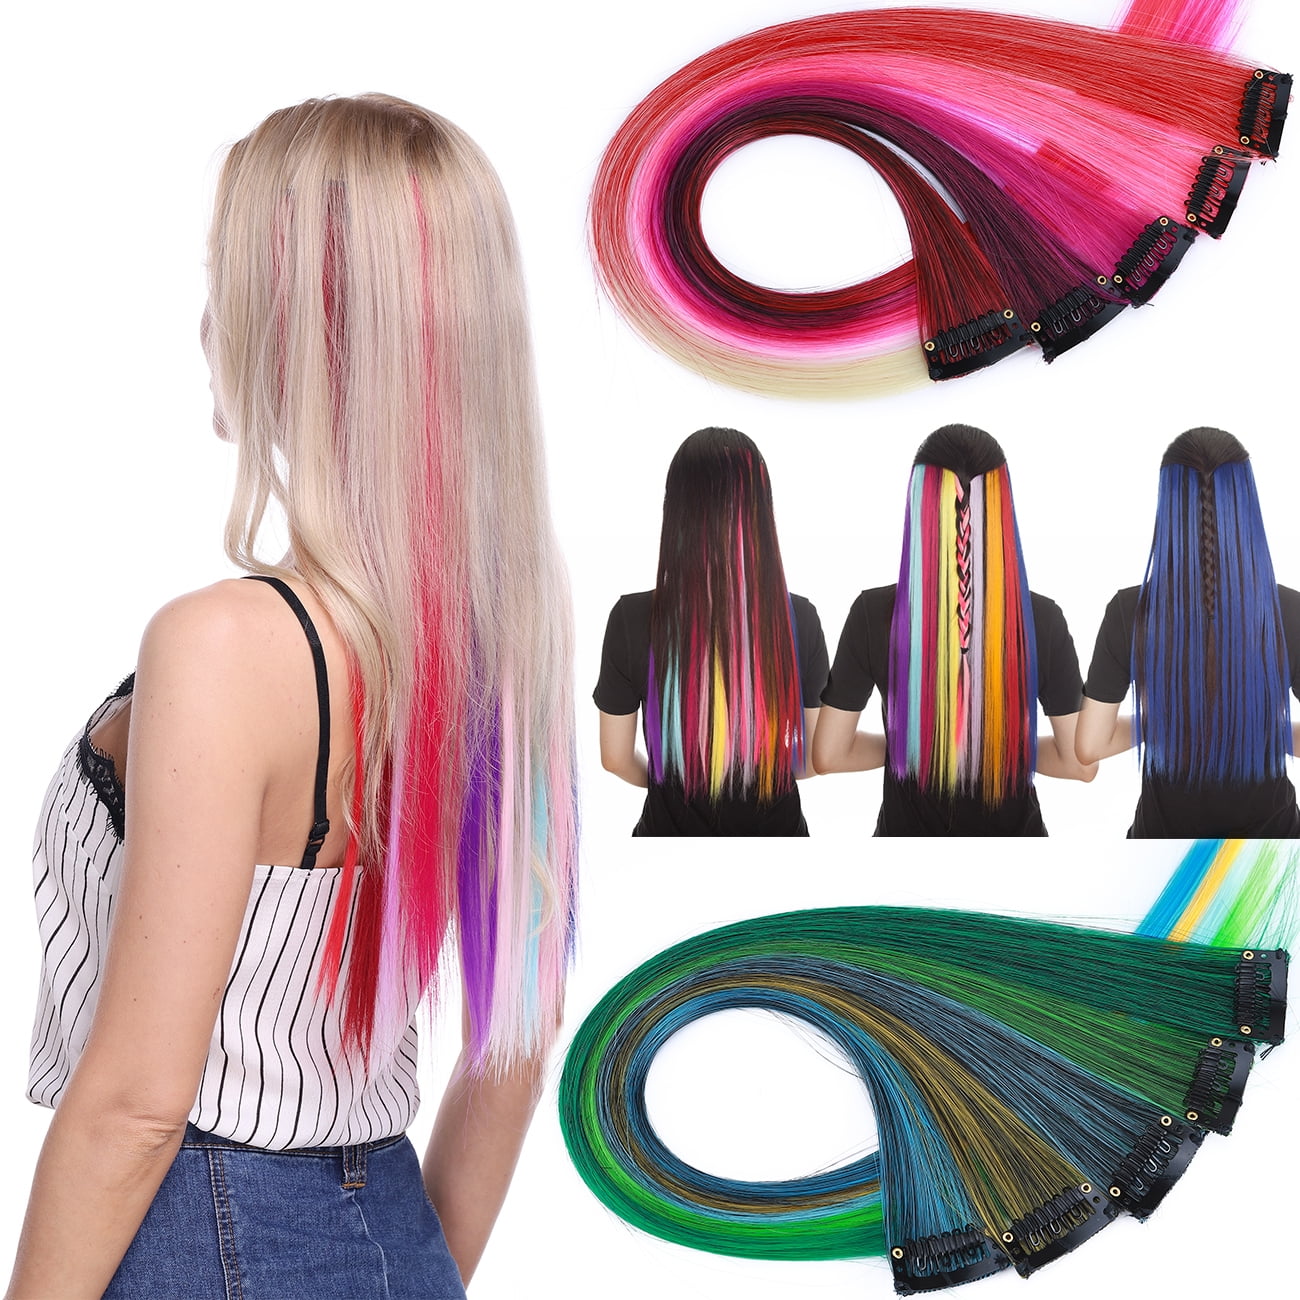 Benehair 10PCS Colorful Hair Extensions Clip in Rainbow Multi-color  Synthetic Long Hairpiece Party Highlights for women girls kids gift -  